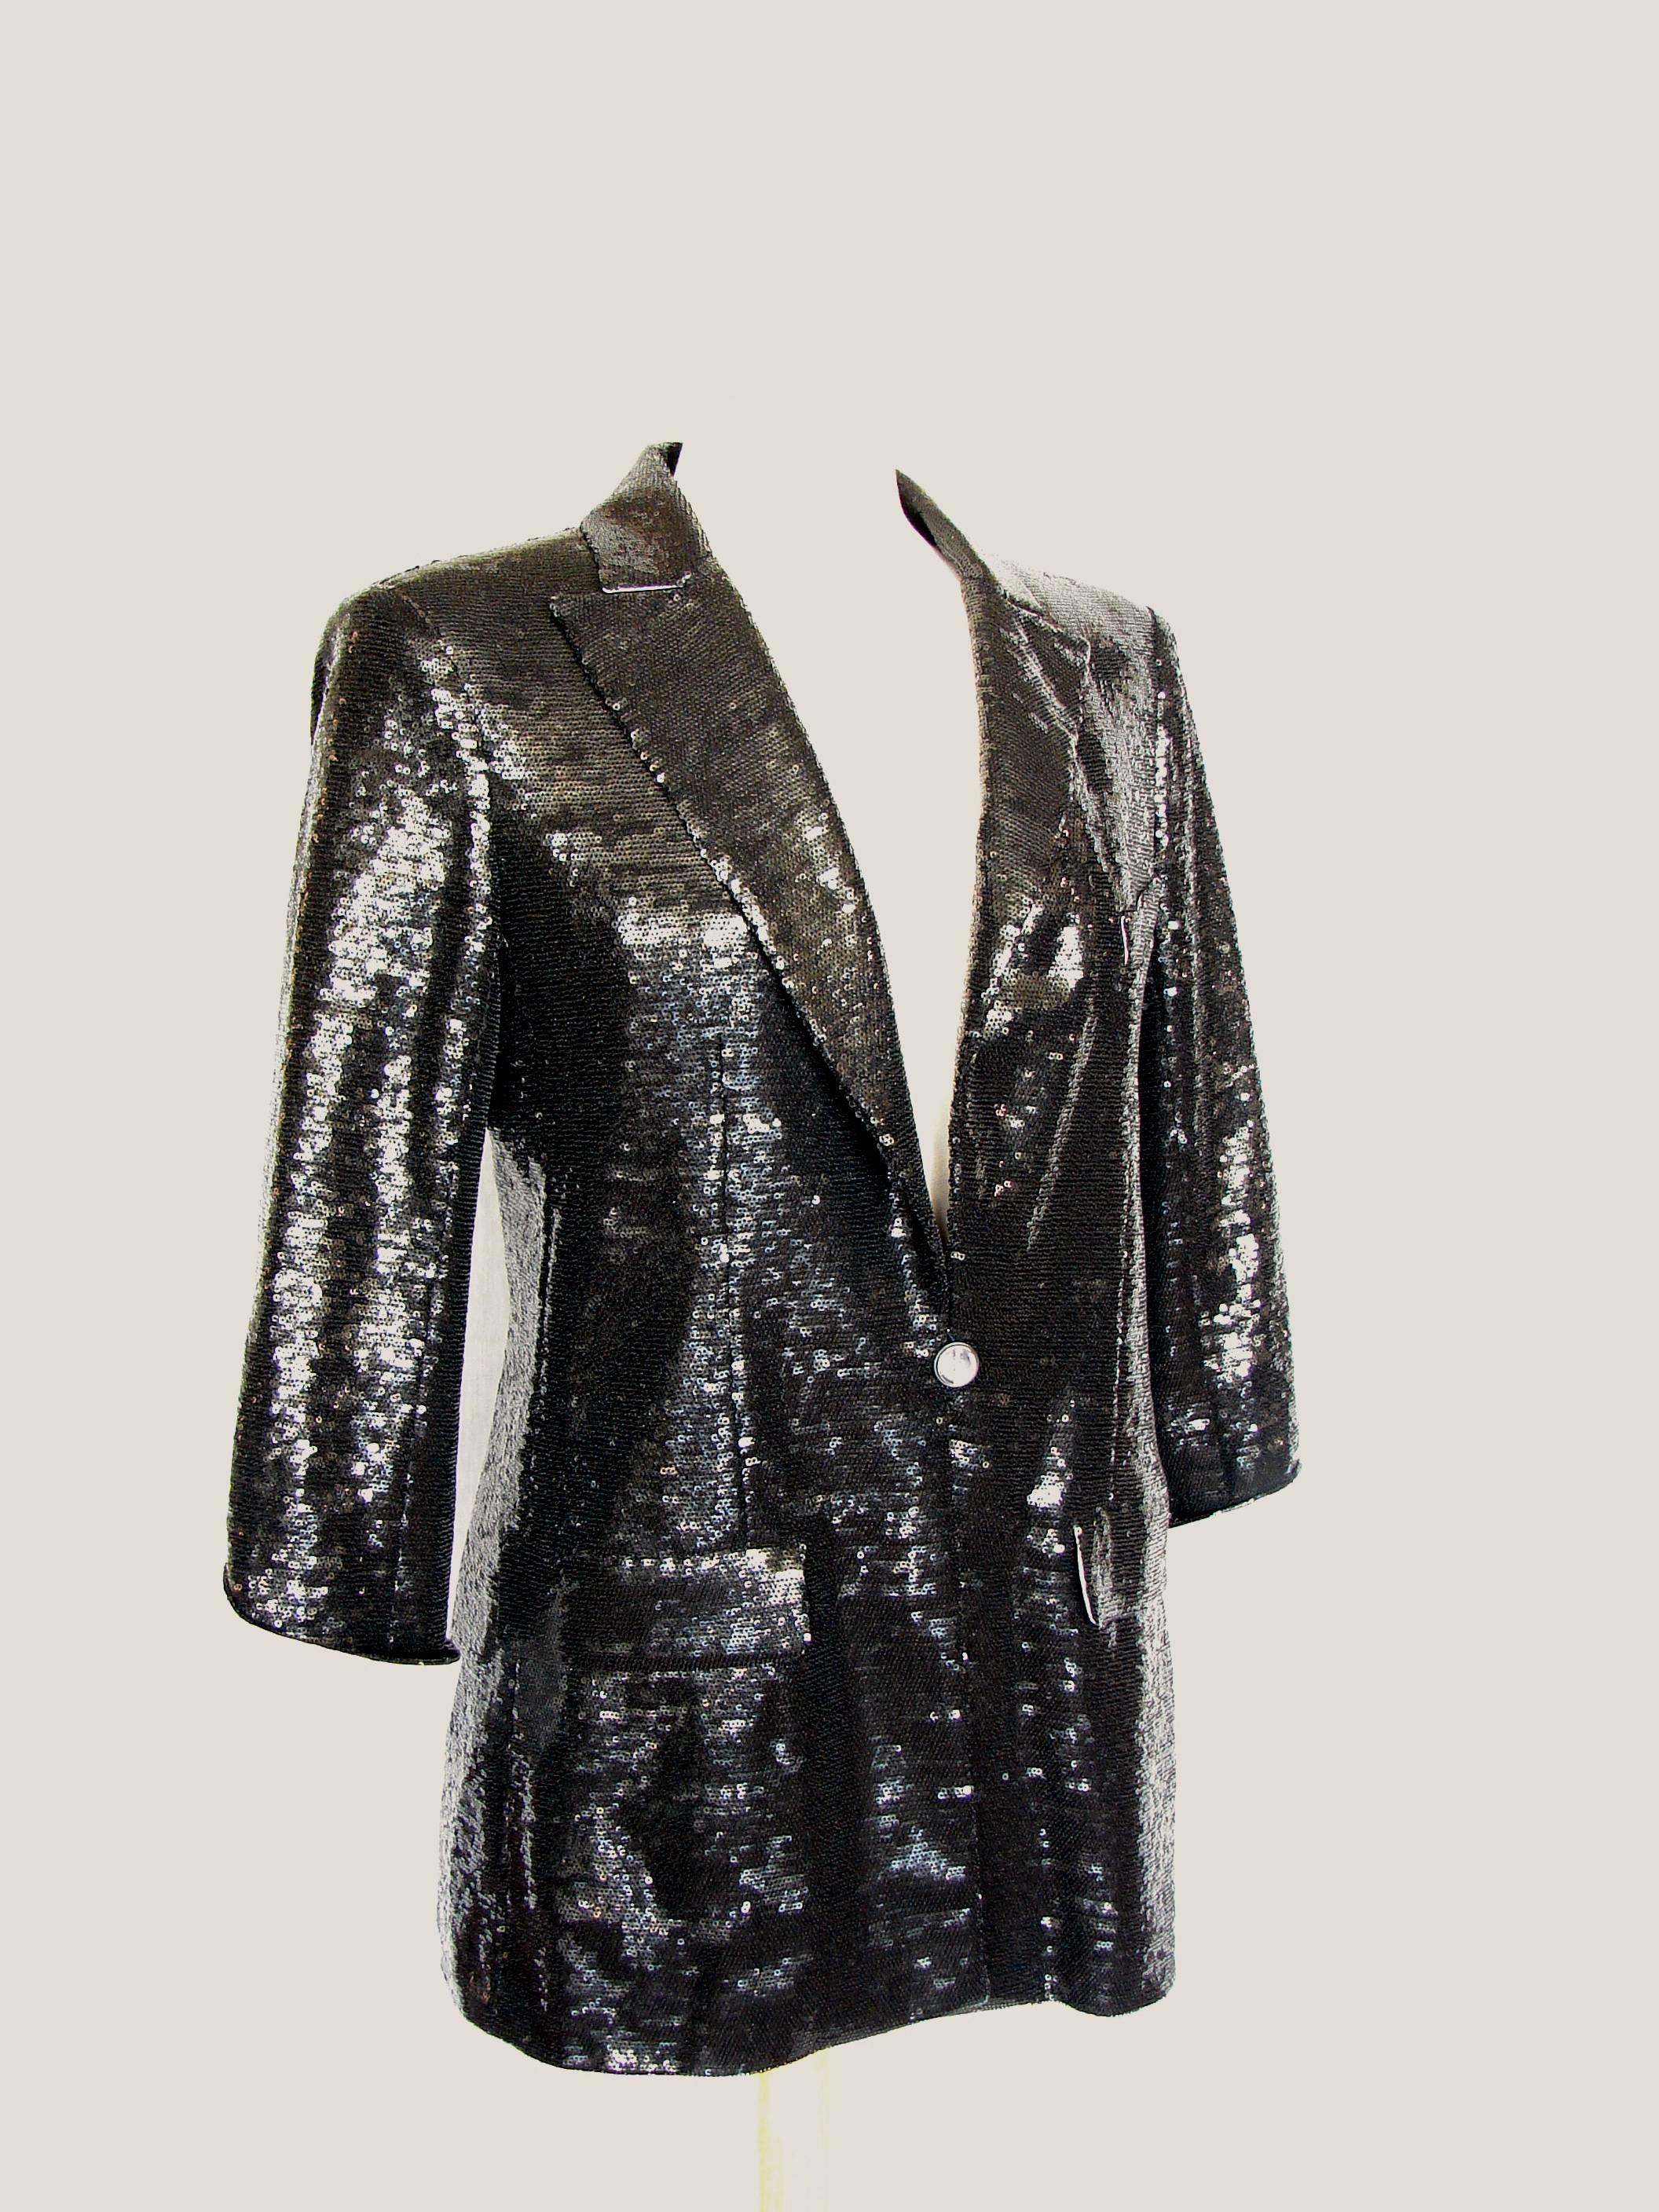 Chanel Evening Jacket Black Sequins with Contrast Cuffs and Collar Sz 44 09C  1